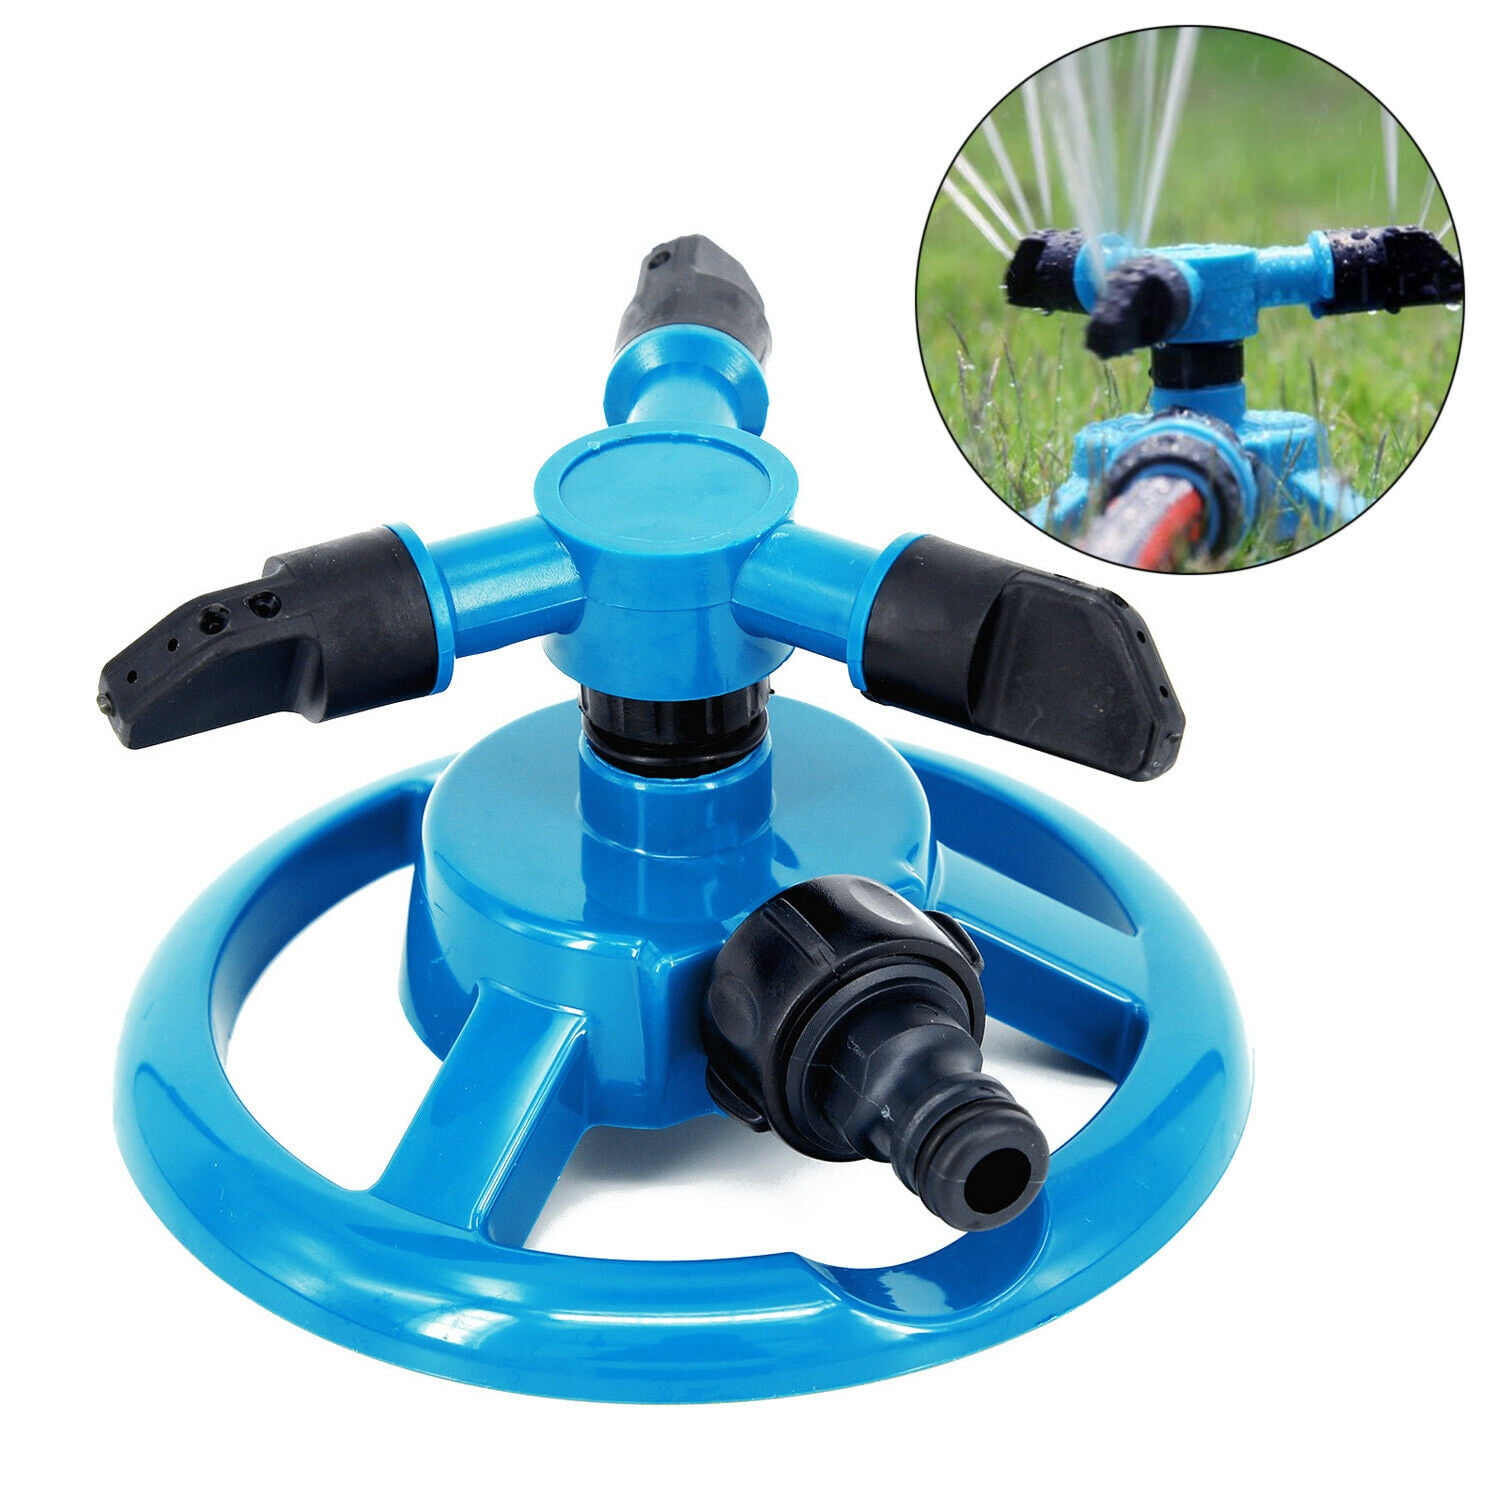 Details about   360 Degree Lawn Circle Rotating Water Sprinkler 3-Nozzles Garden Hose Irrigation 